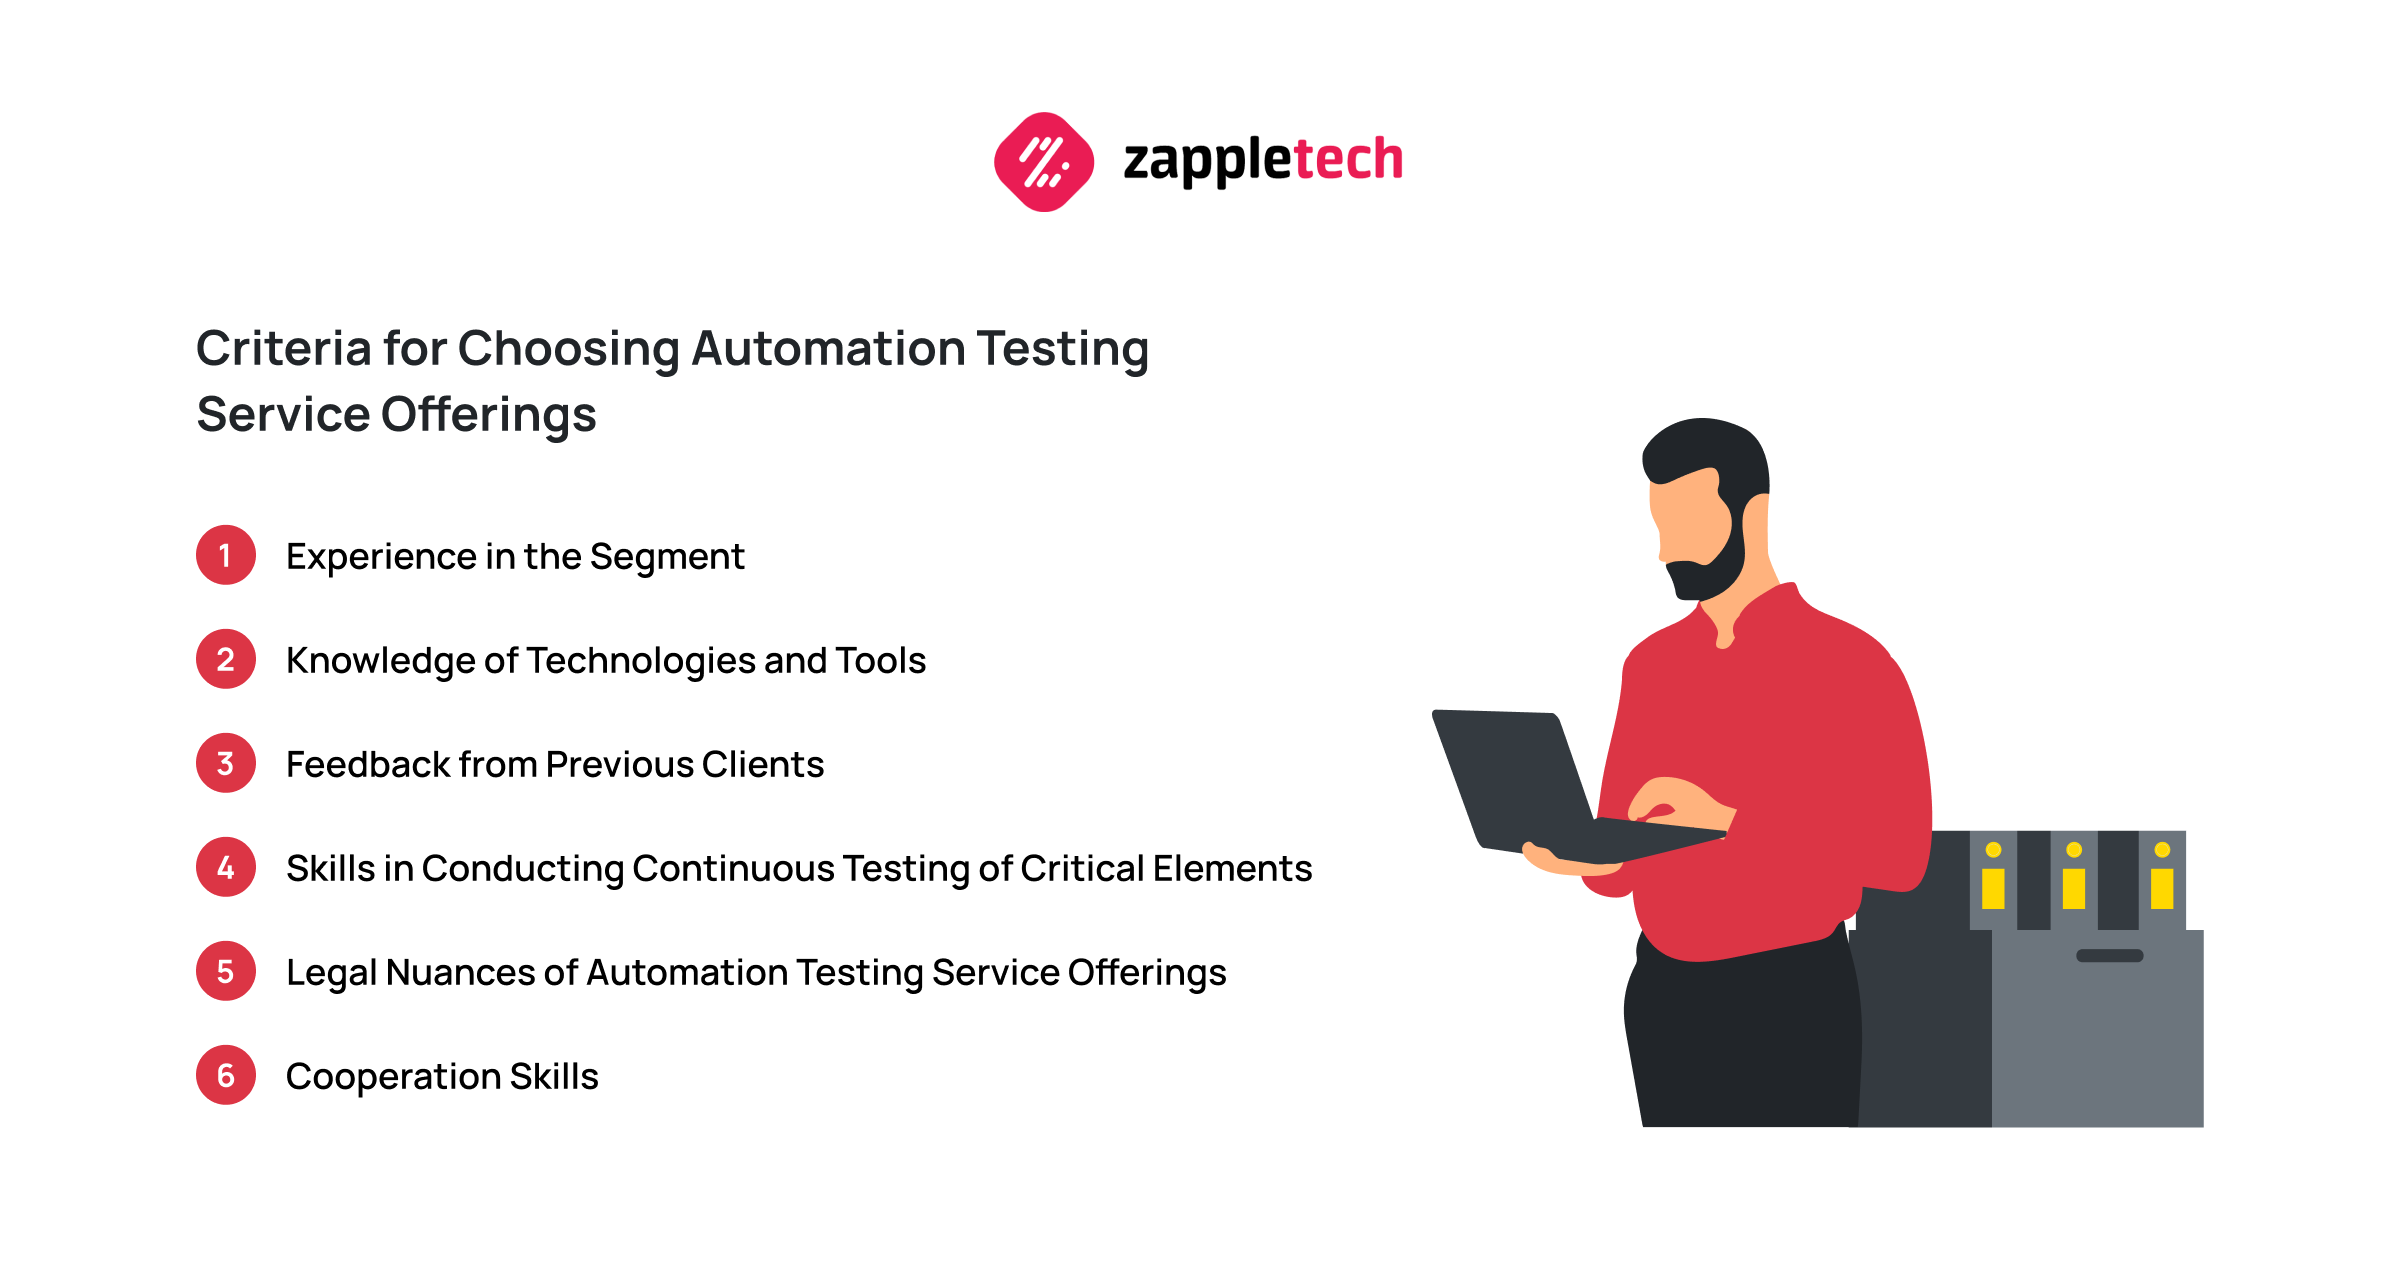 Criteria for Choosing Automation Testing Service Offerings